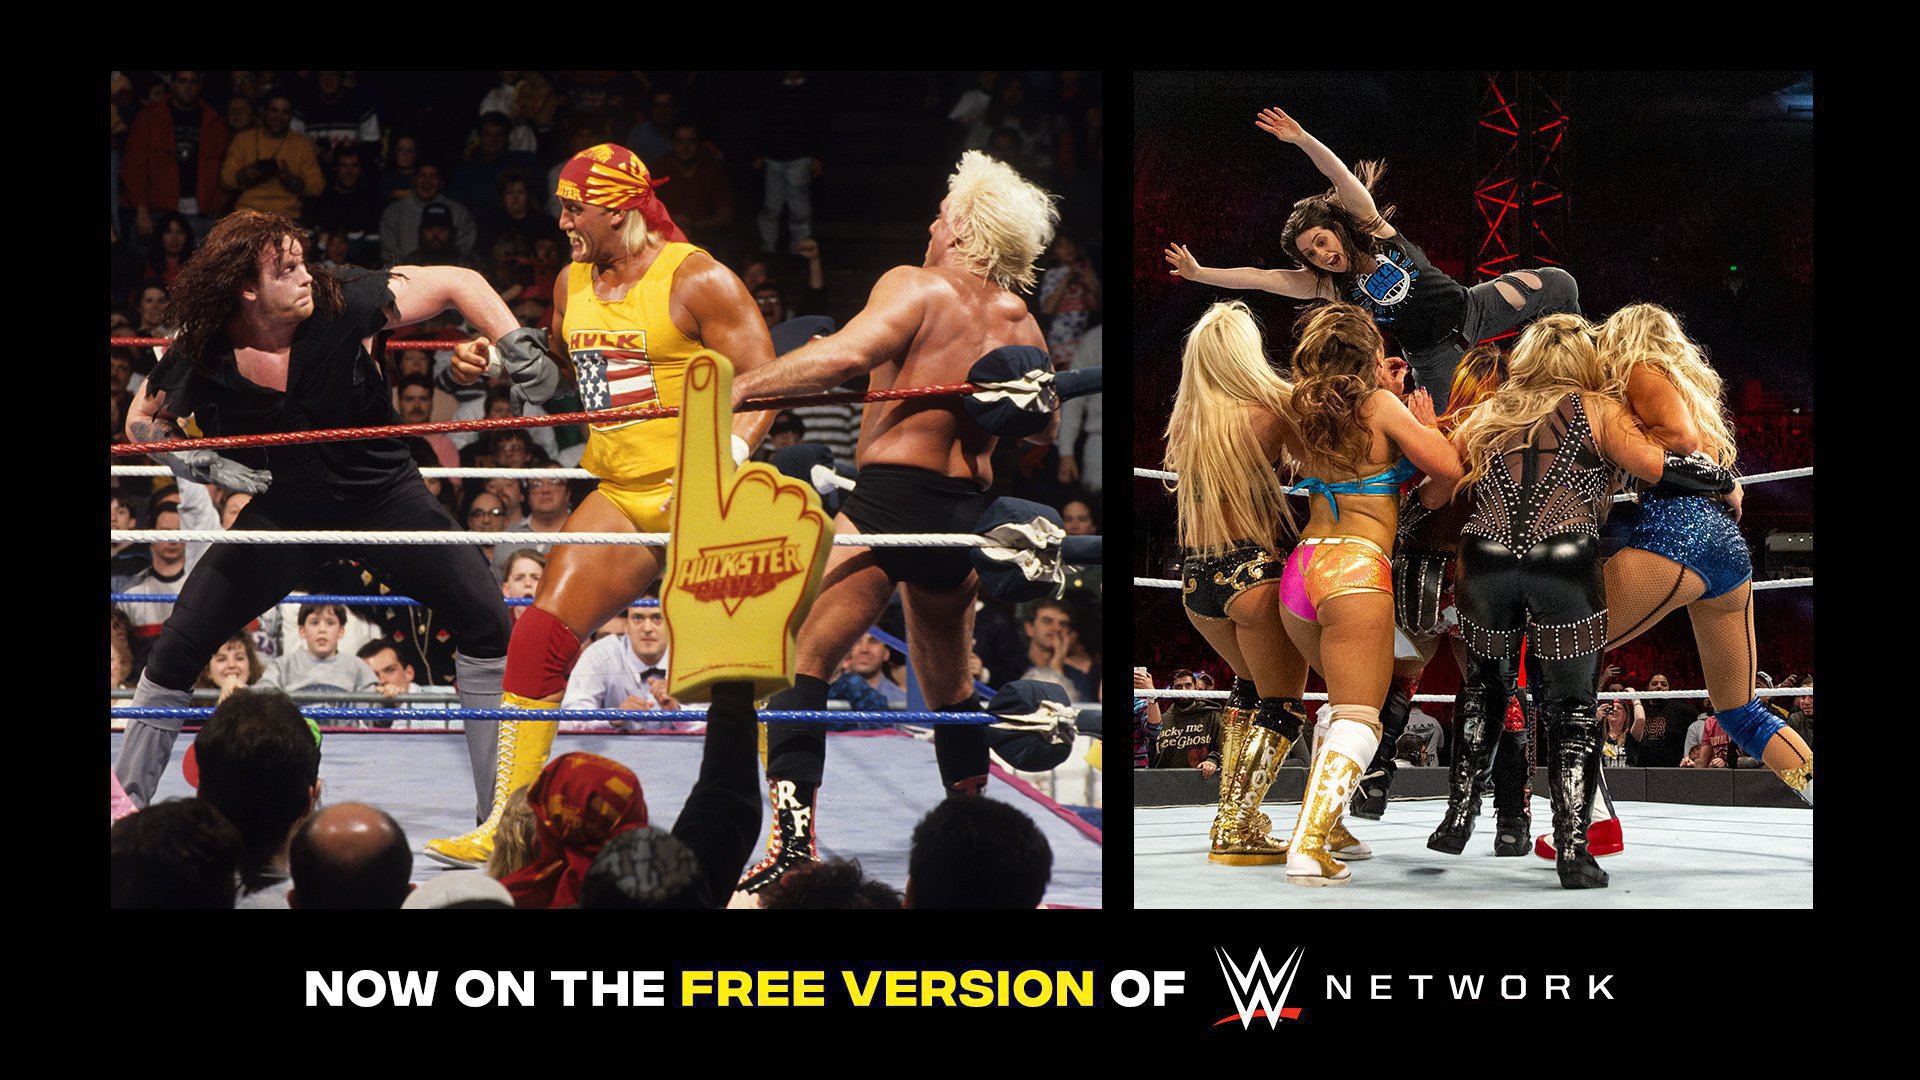 20+ Royal Rumble events available now on the Free Version of WWE